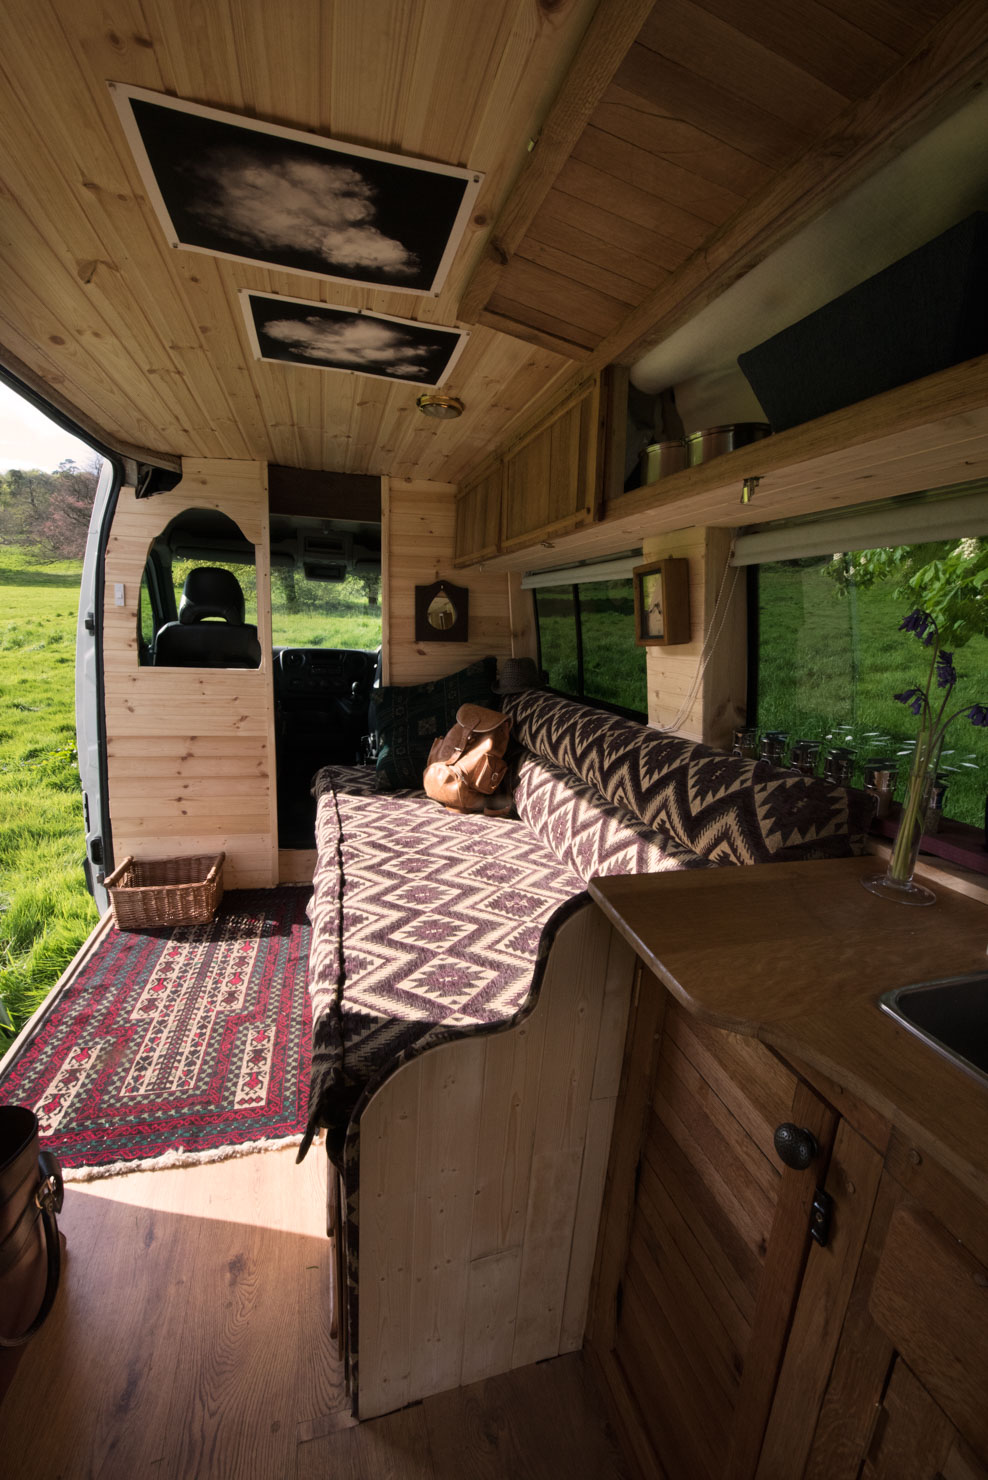 Interior of a cozy campervan with wooden paneling. The space features a patterned sofa, a woven rug, and a small kitchen area with a sink. A teddy bear sits on the sofa. Sunlight filters in through the open side door, revealing a green field outside. Photos and storage shelves adorn the walls.